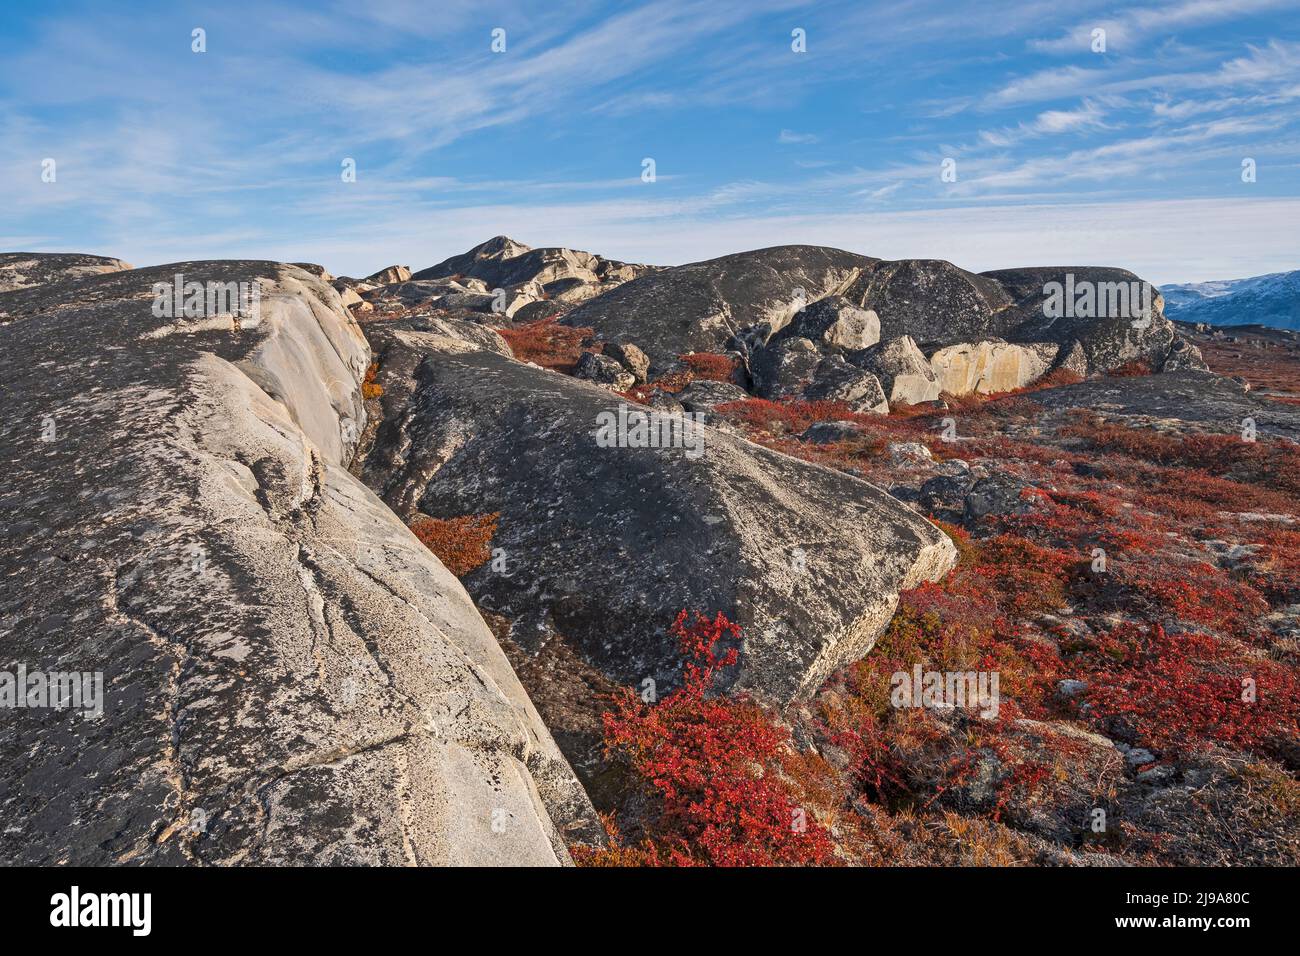 Bare Rock and Fall Colors in the Arctic Near Eqip Sermia in Greenland Stock Photo